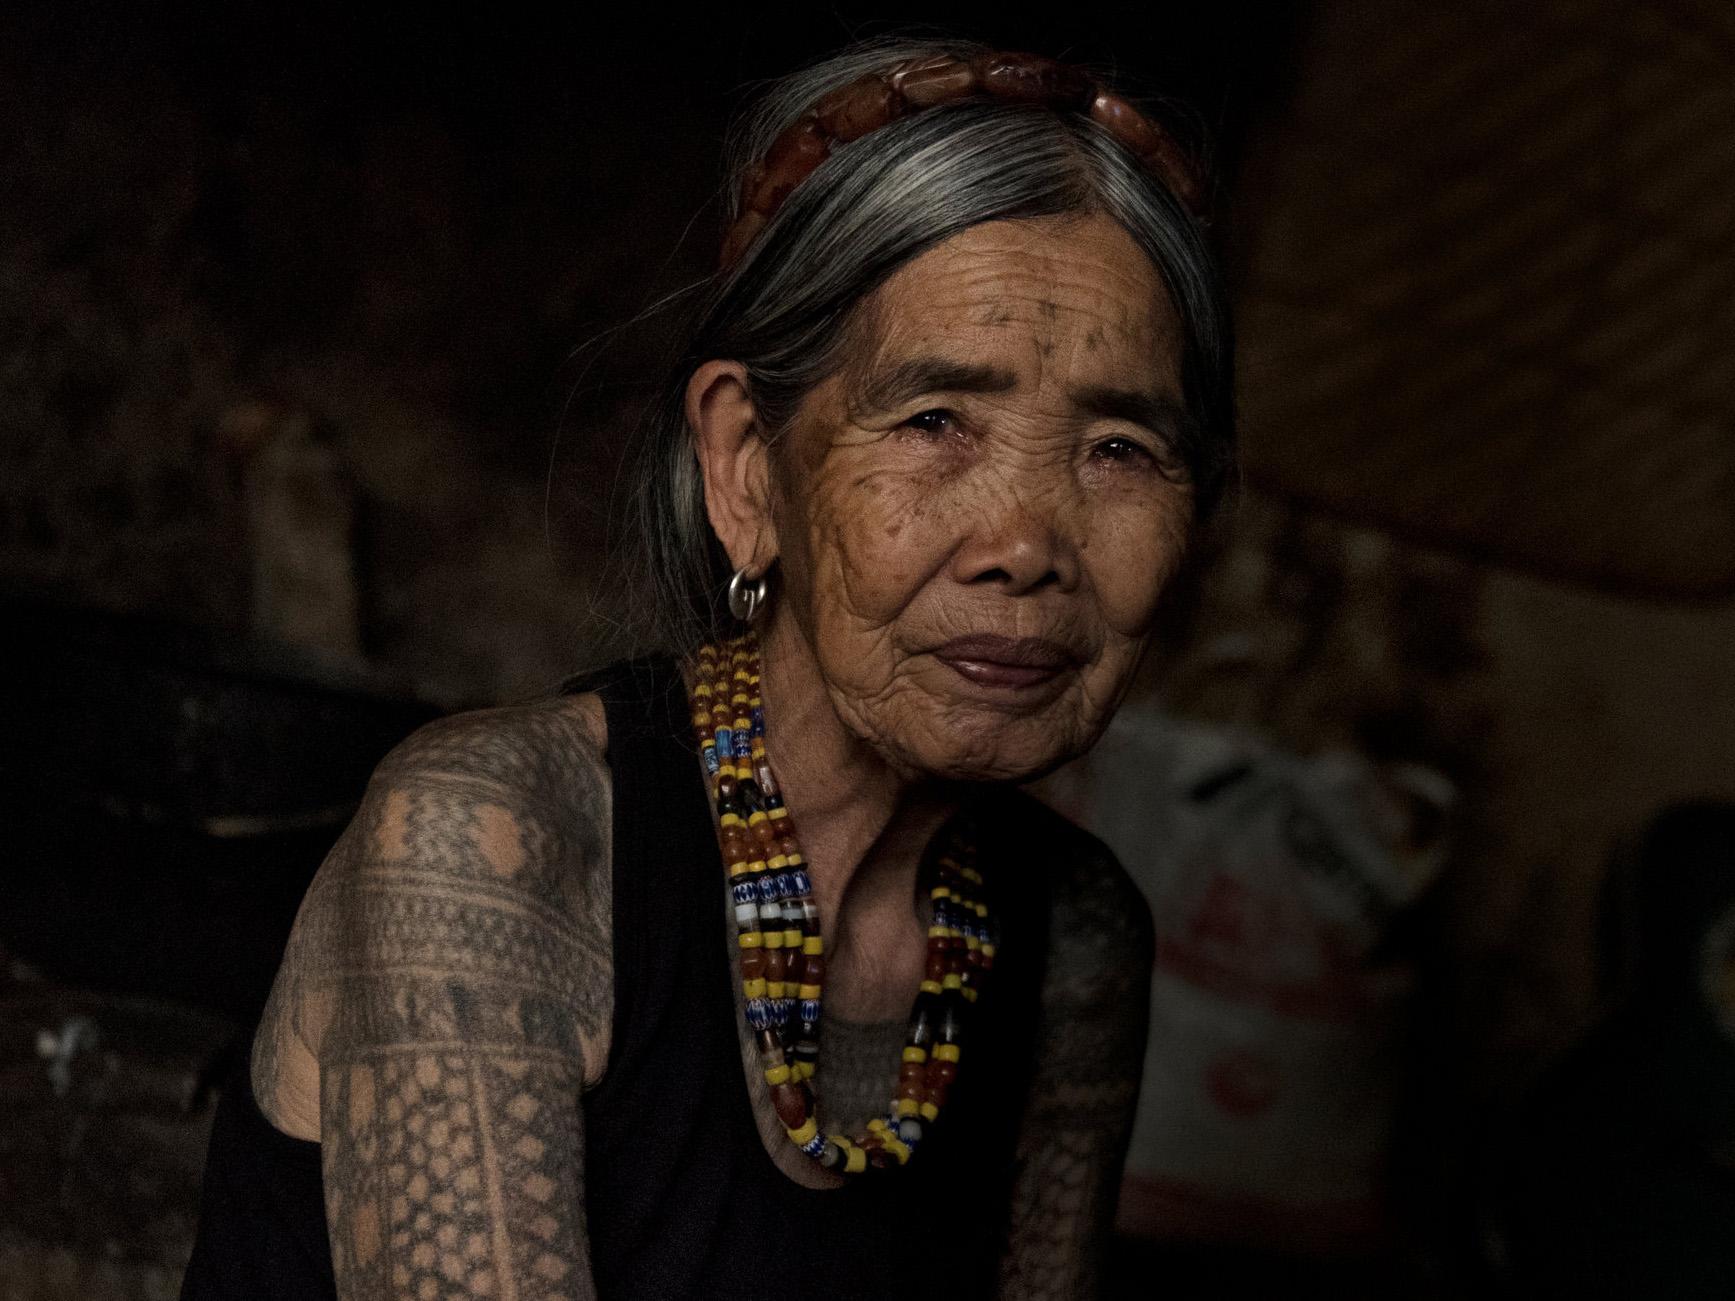 The 100yearold Filipino woman keeping a tribal tattoo tradition alive   The Independent  The Independent